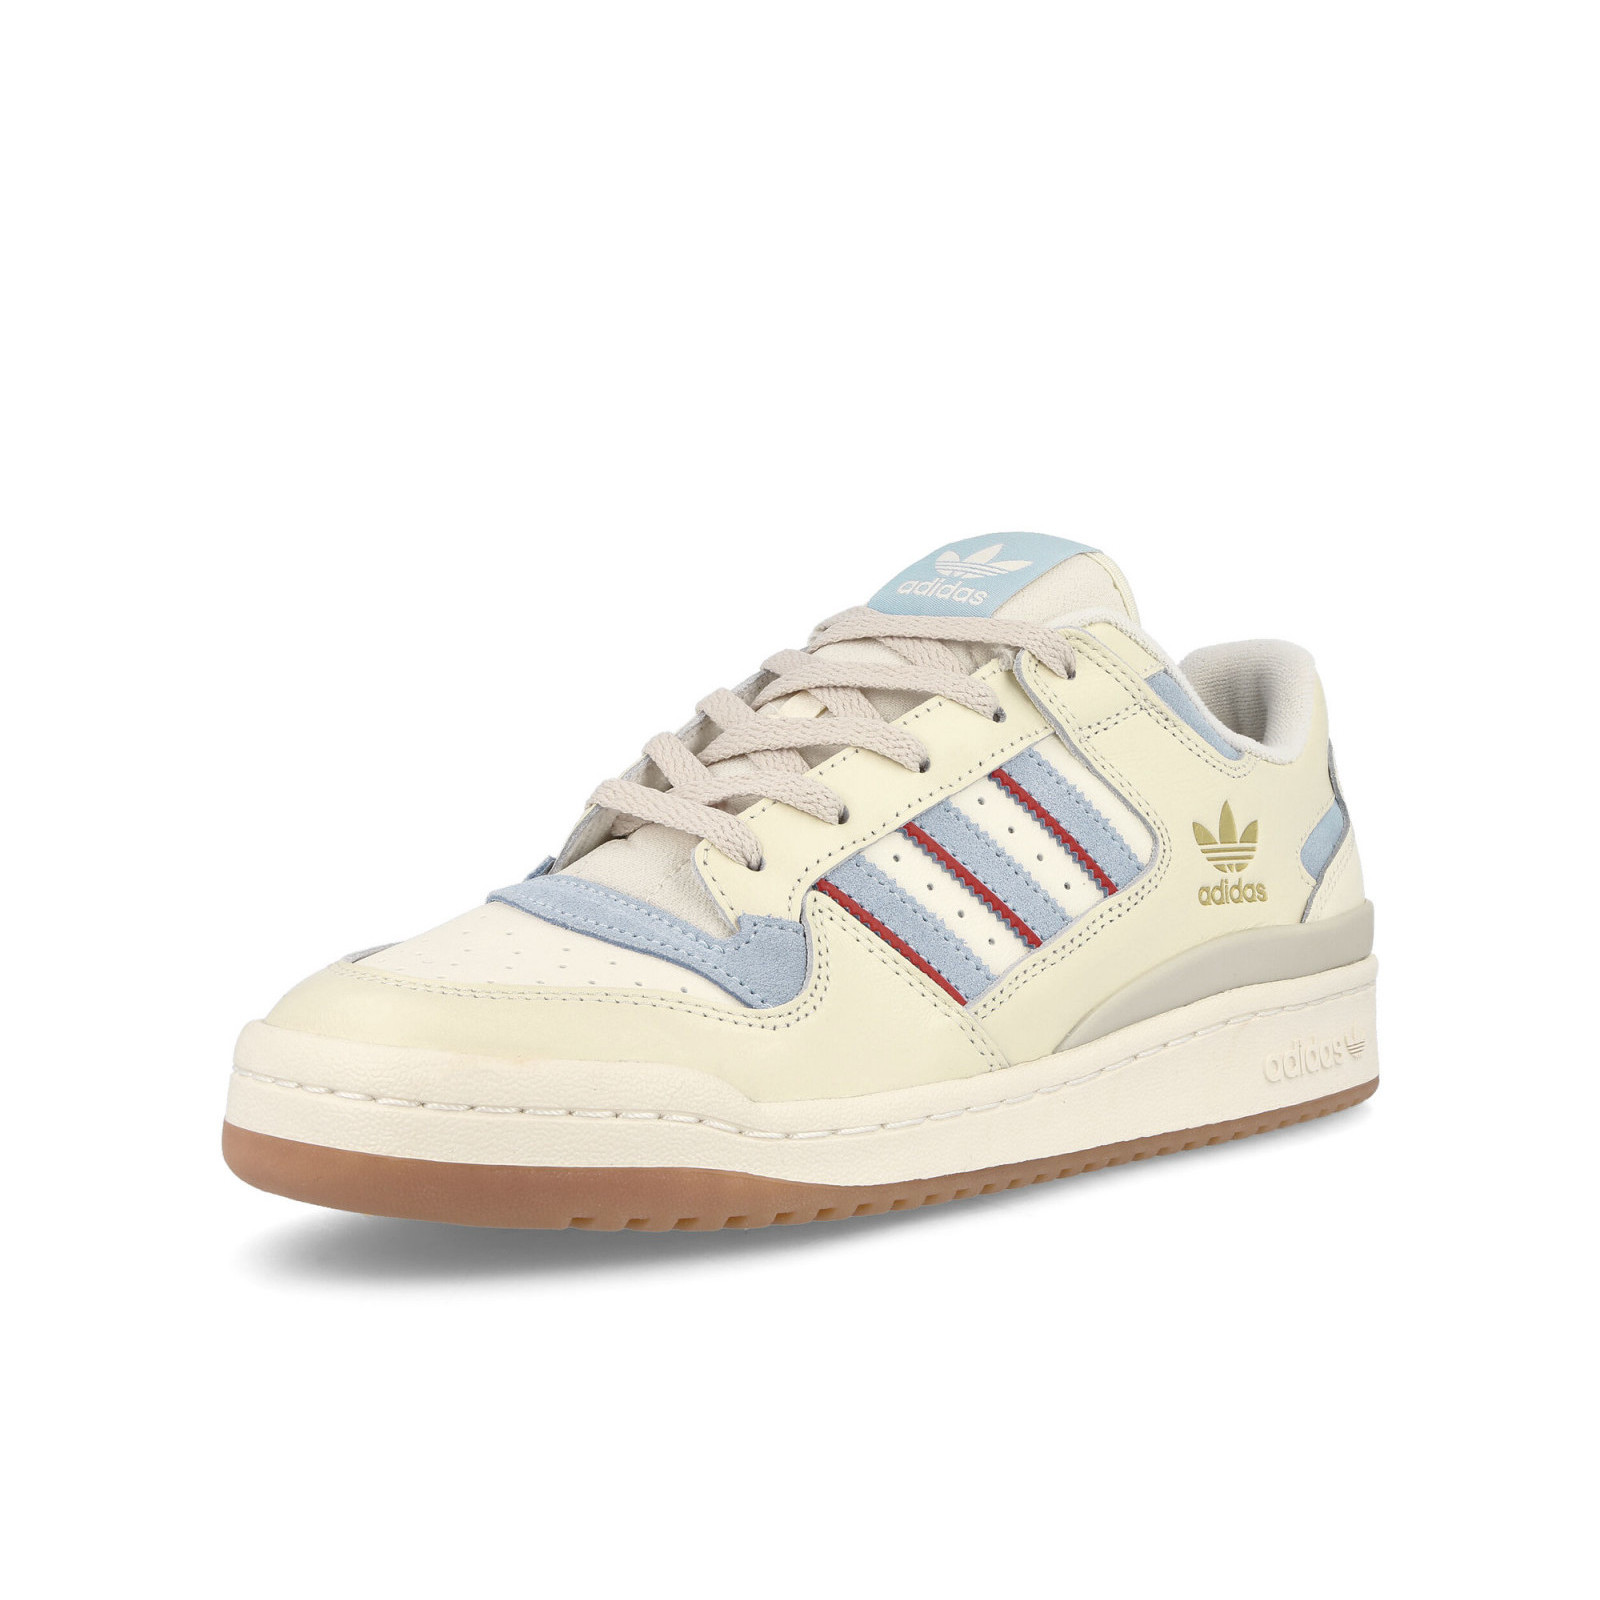 Adidas Forum Low Classic
White / Blue Red